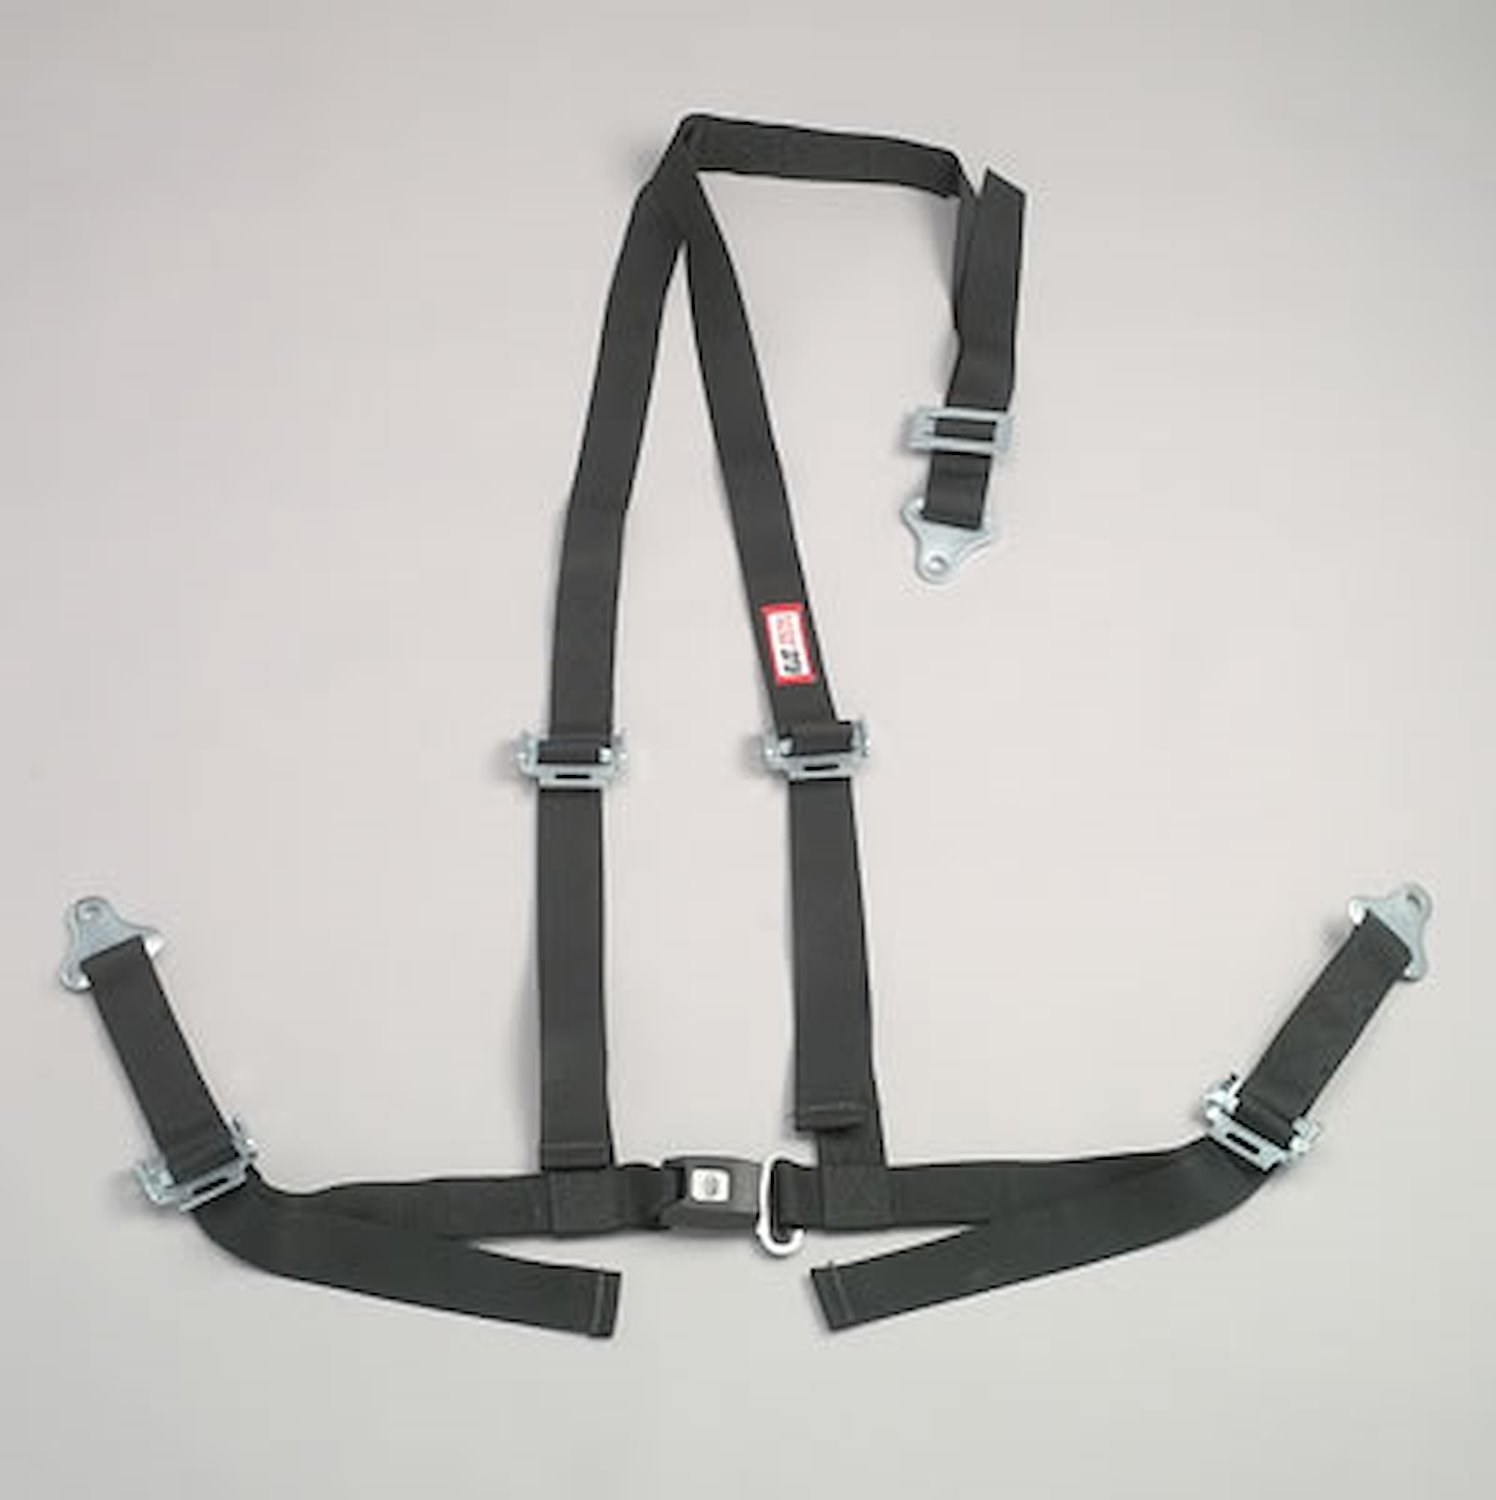 NON-SFI B&T HARNESS 2 PULL UP Lap Belt 2 S. H. Individual ROLL BAR Mount ALL WRAP ENDS w/STERNUM STRAP RED